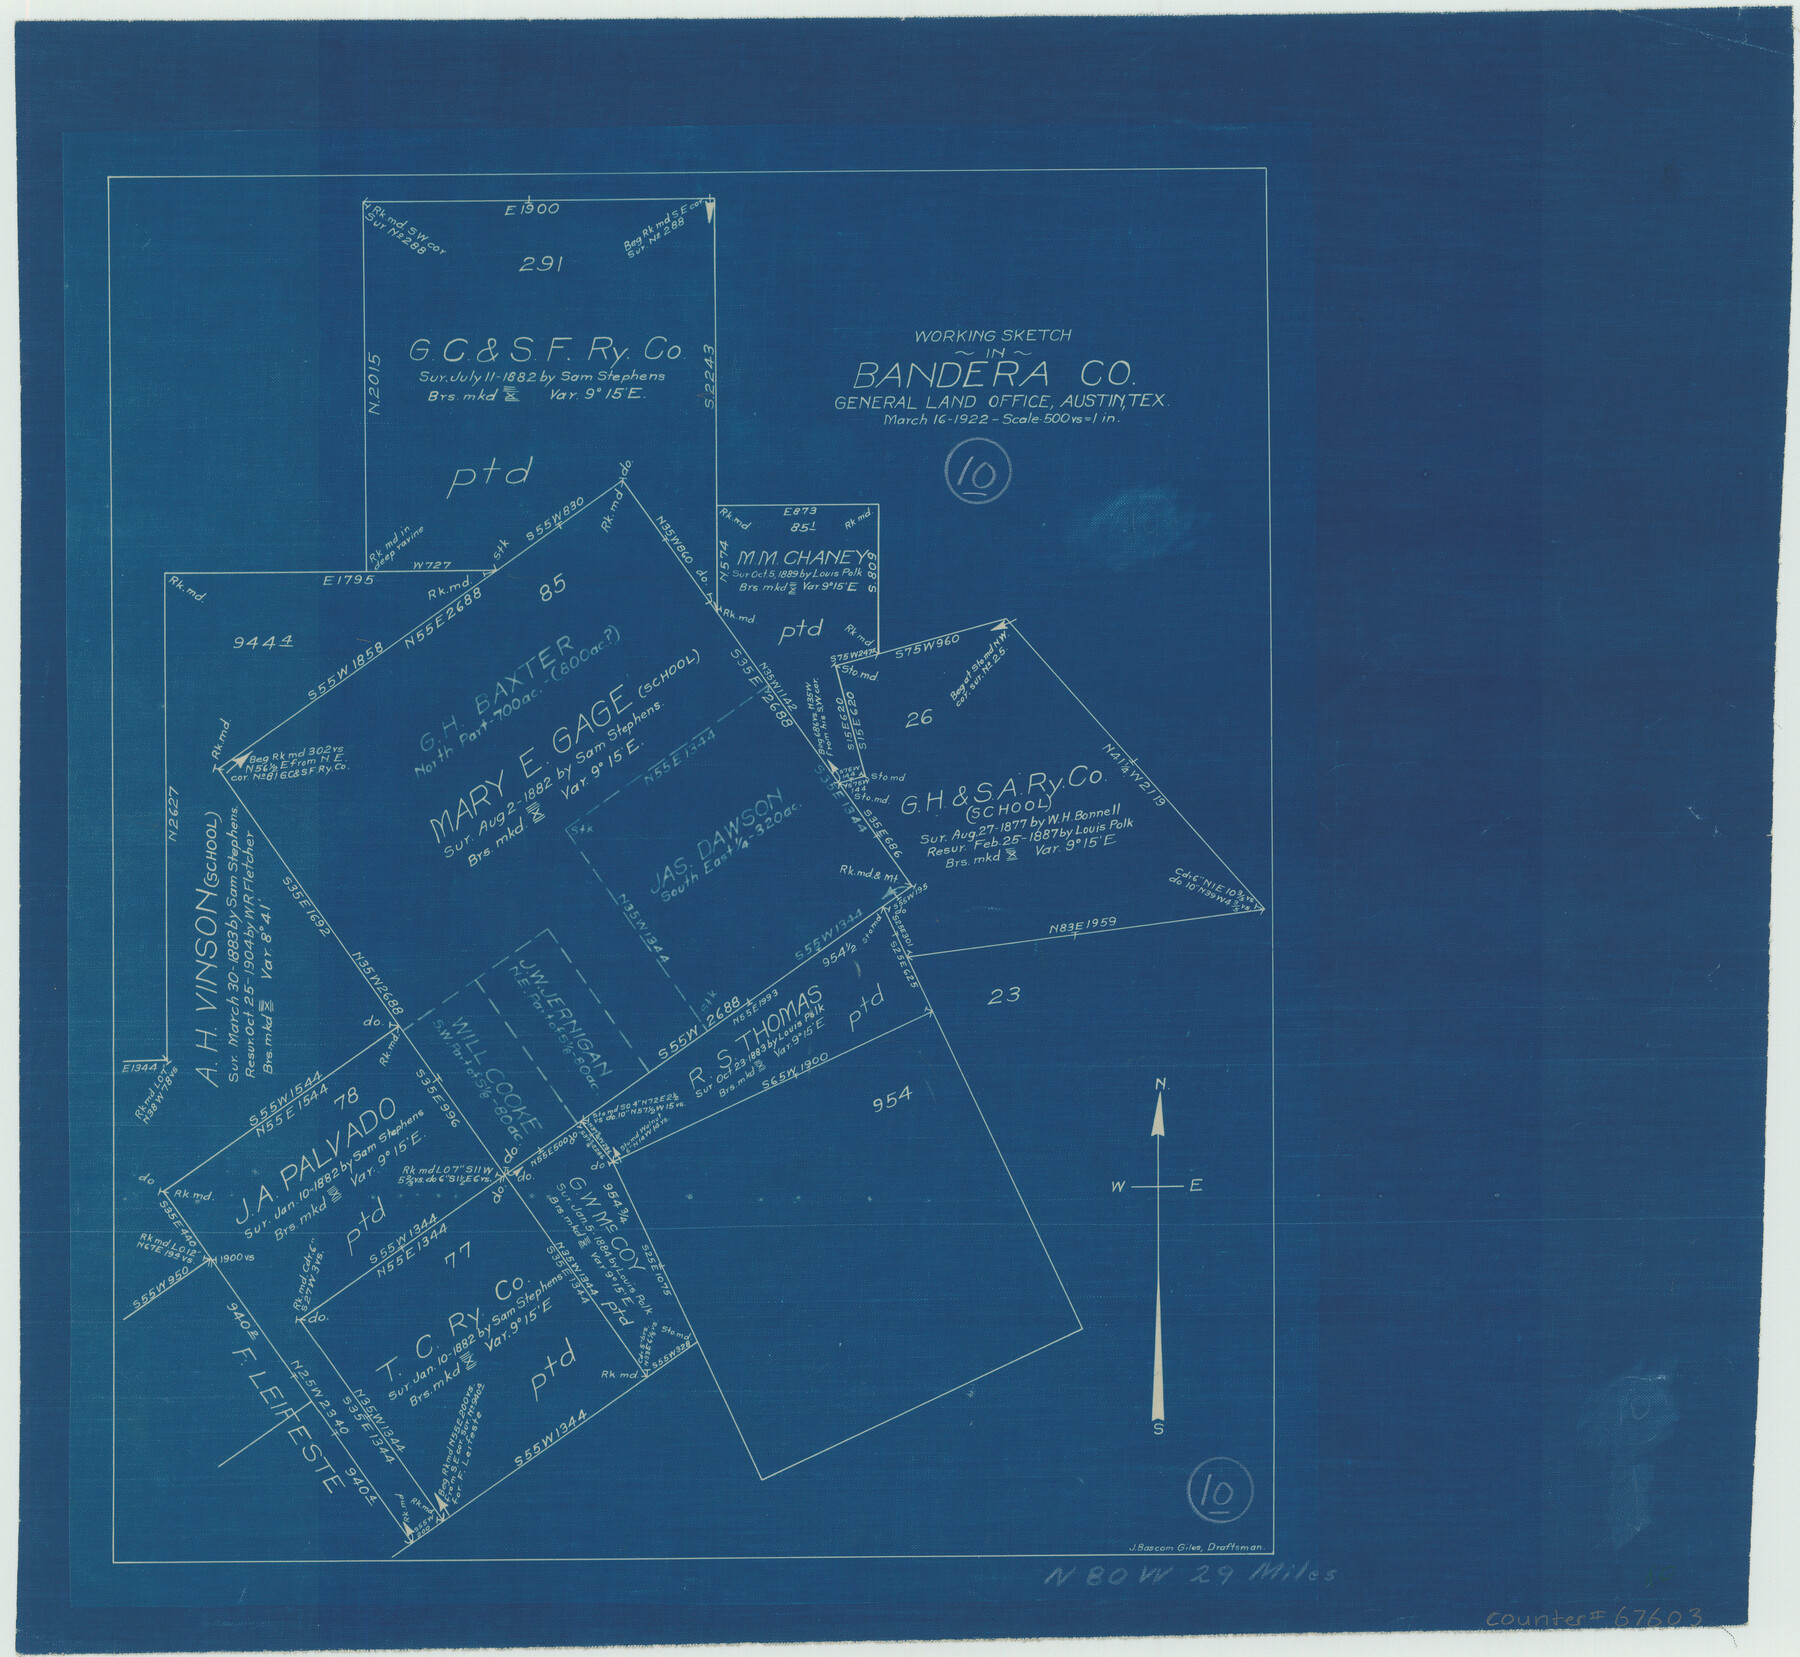 67603, Bandera County Working Sketch 10, General Map Collection